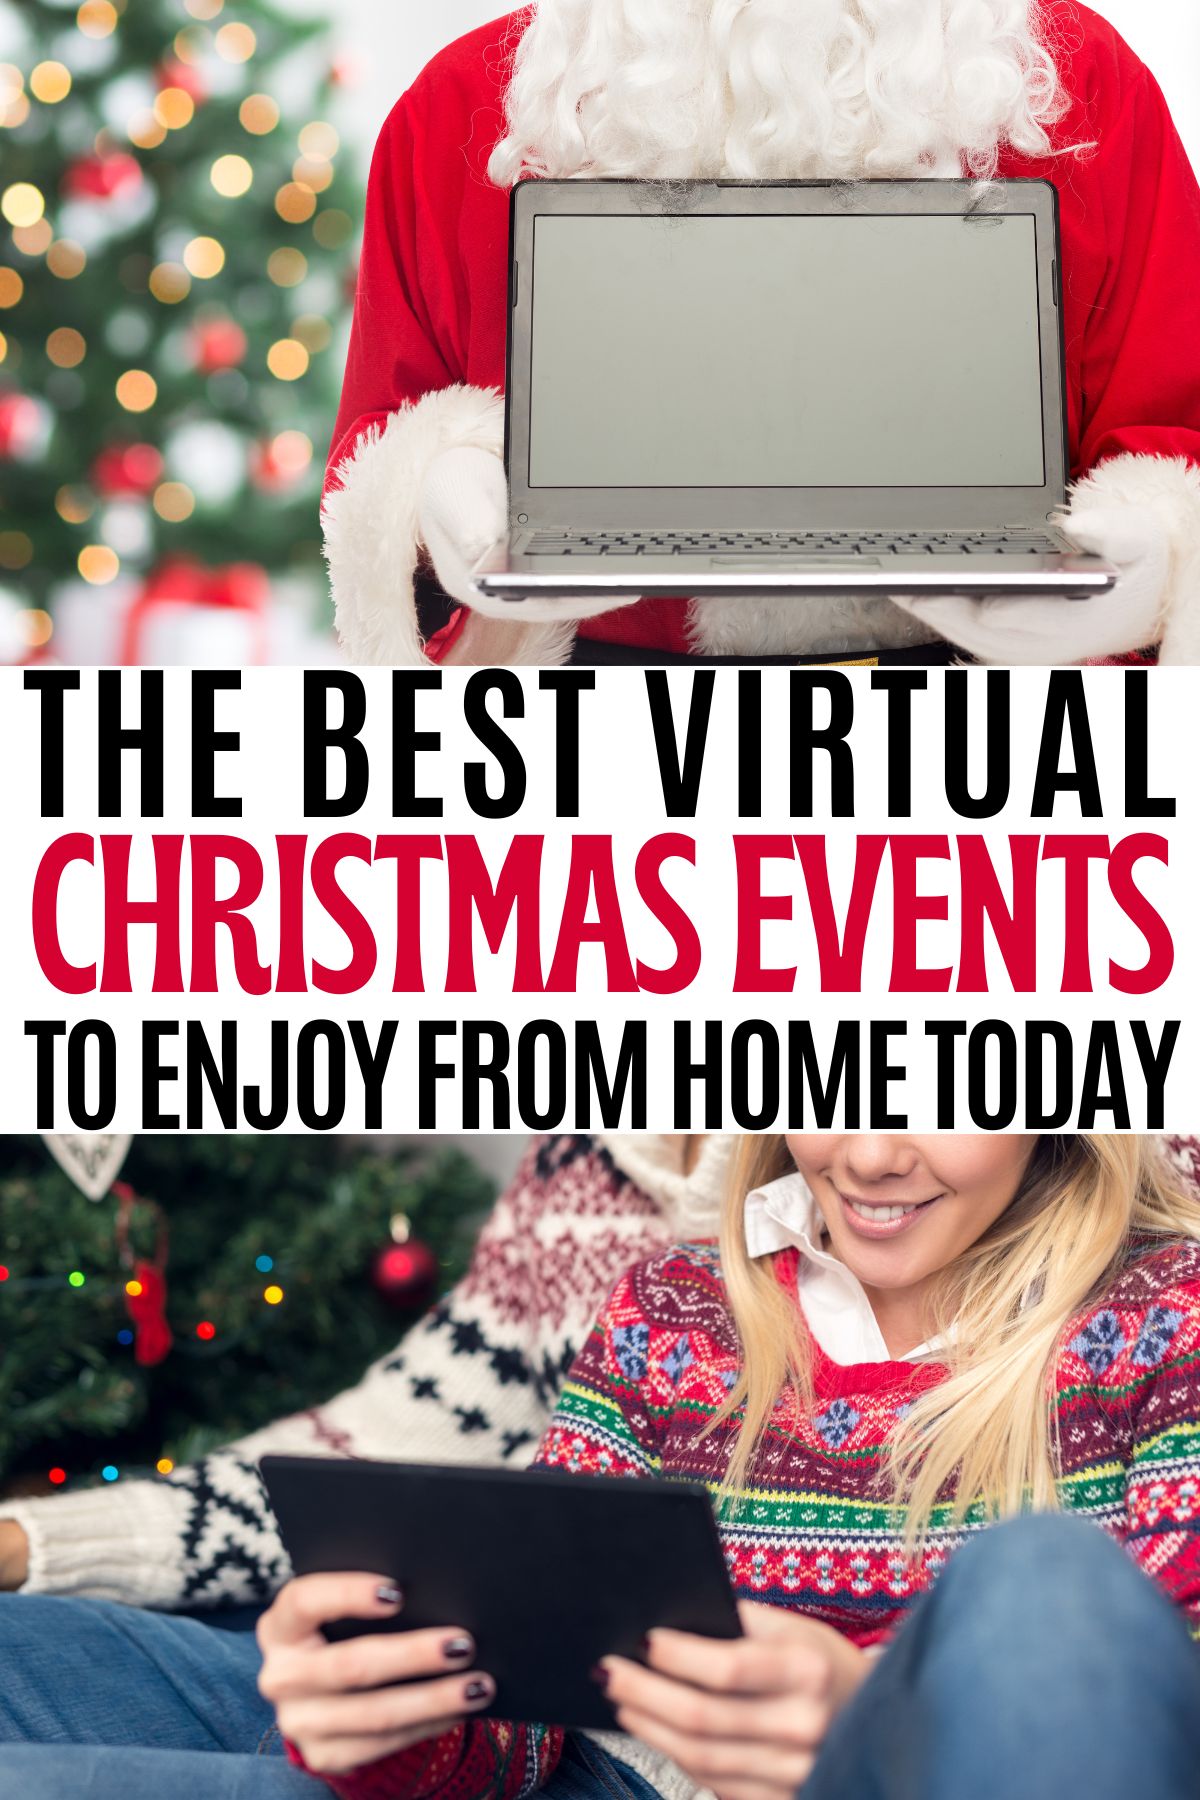 Santa holding a laptop and couple looking at a iPad with text the best virtual christmas events to enjoy from home.